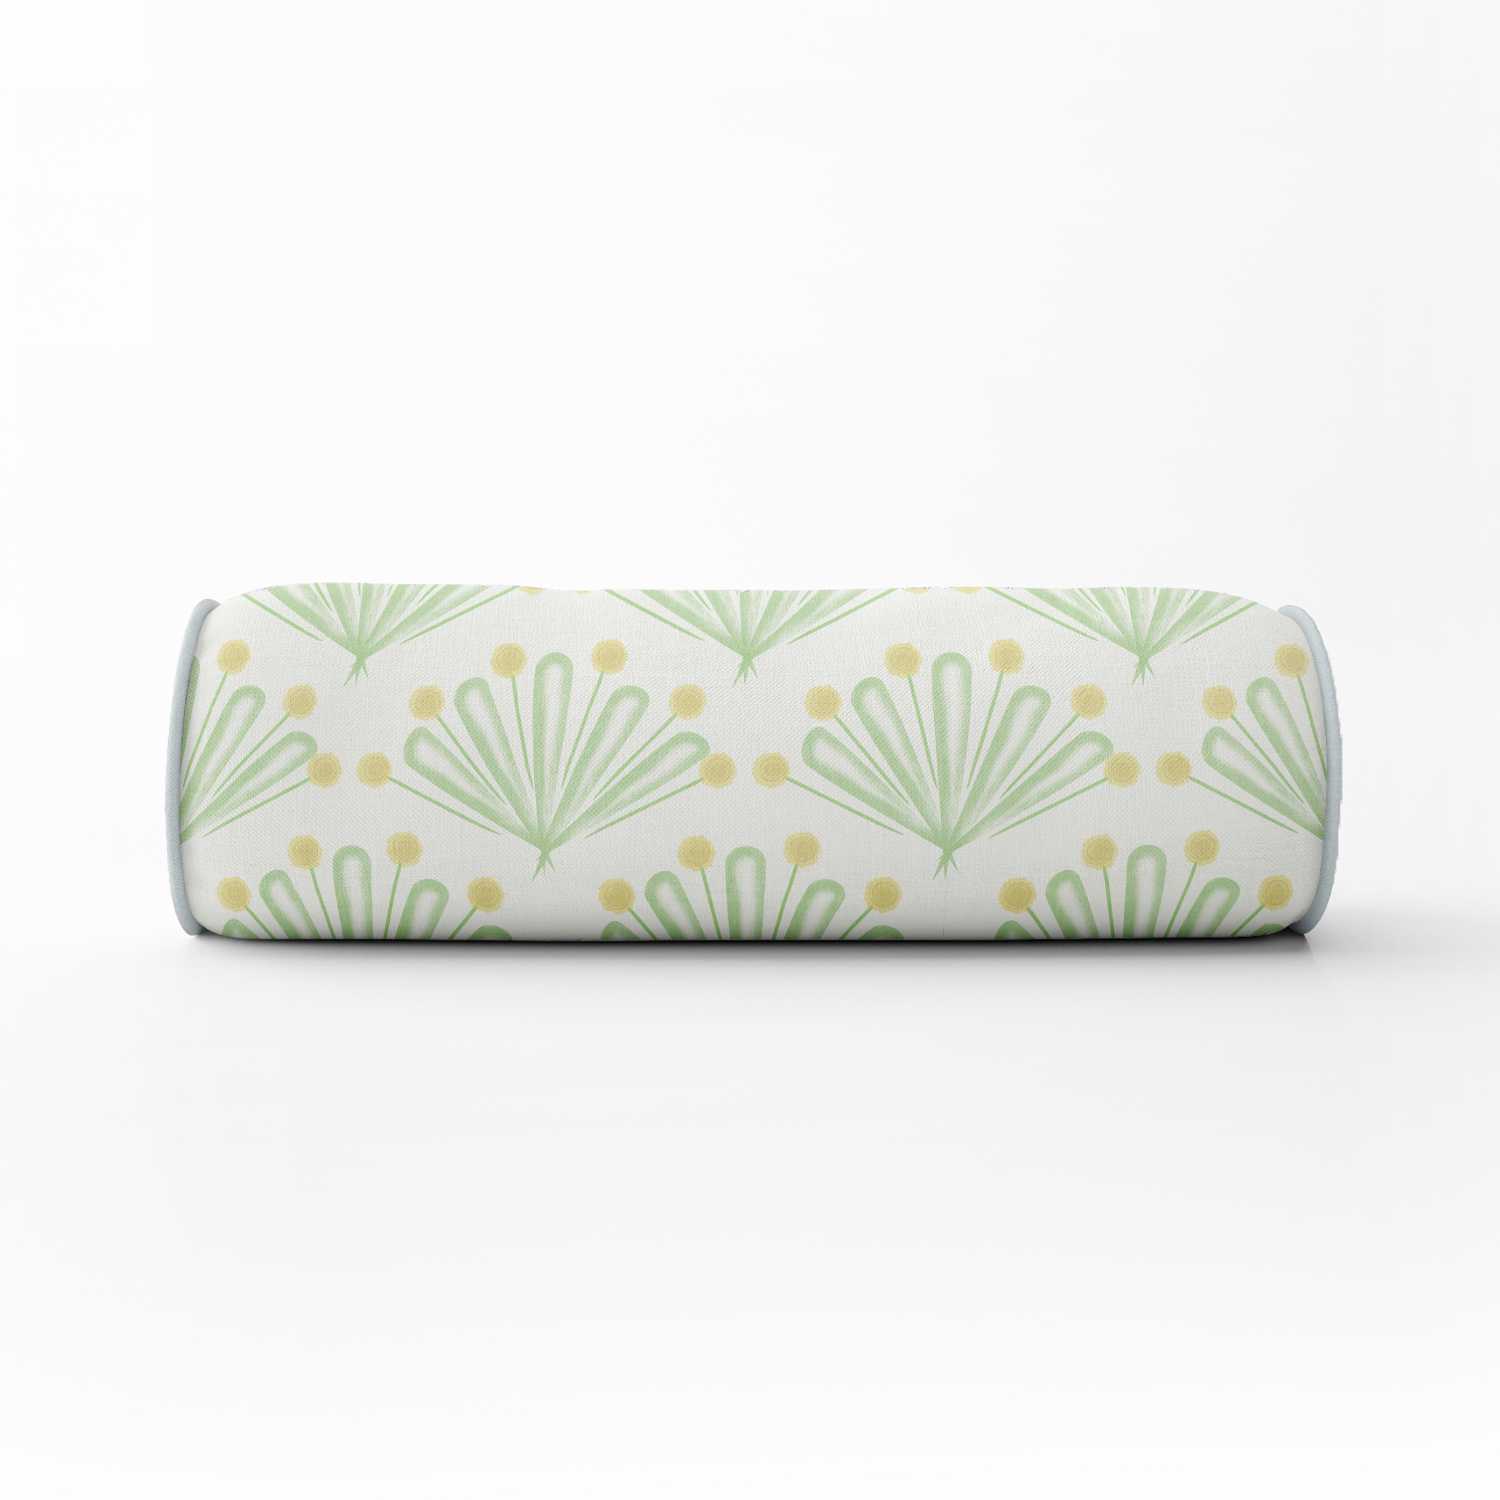 large-scale-green-yellow-flower-bolster-blue-piping-520371.jpg